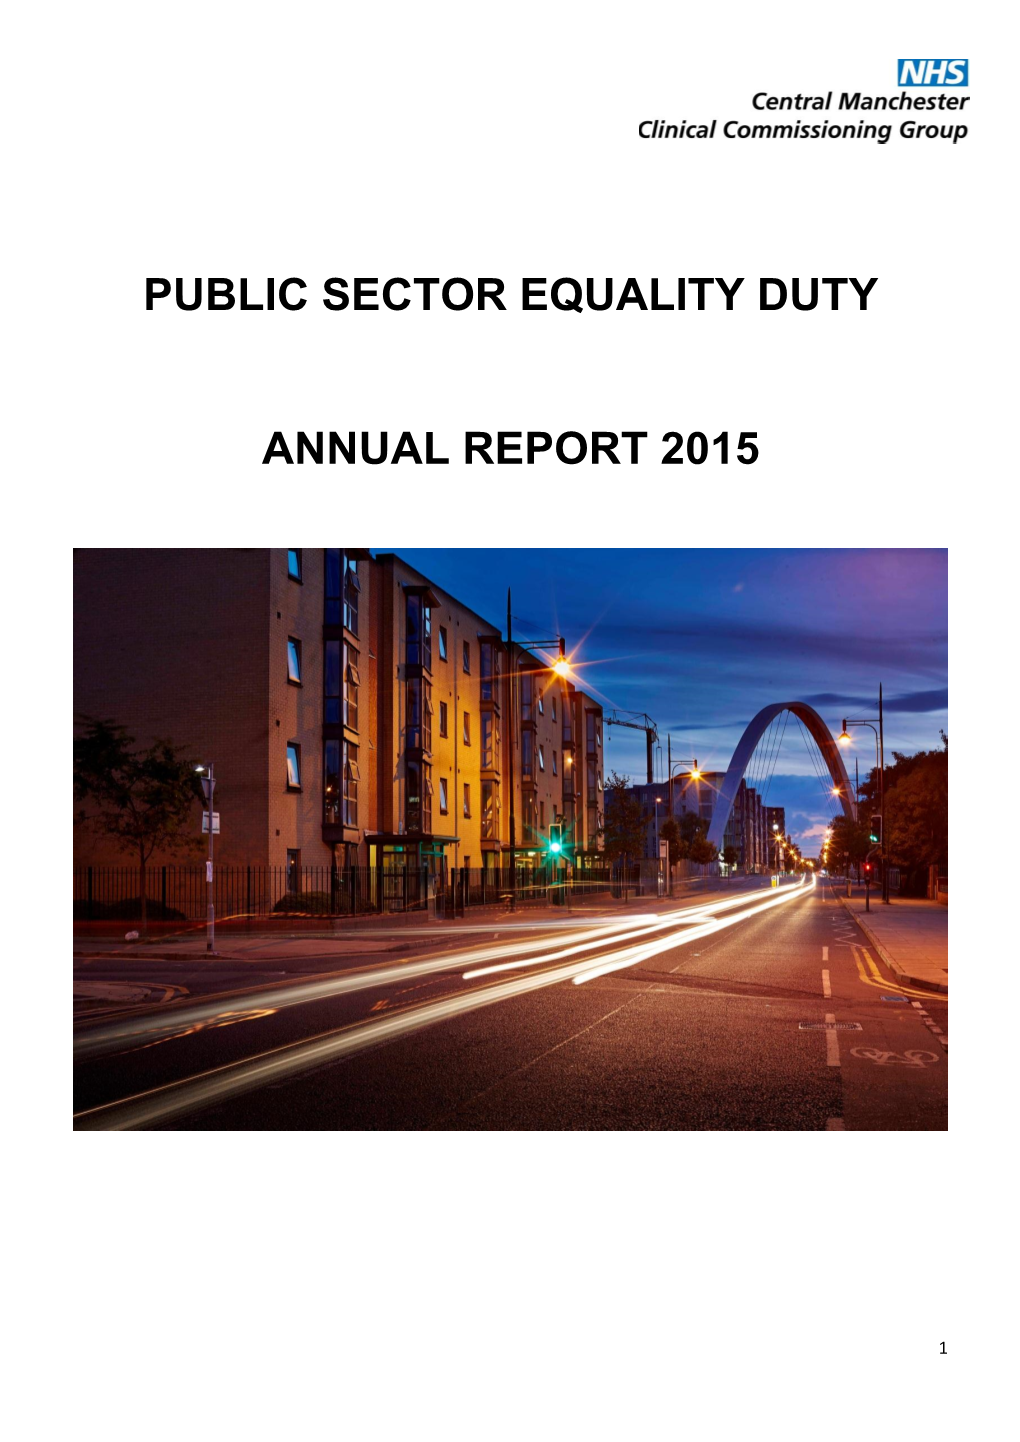 Public Sector Equality Duty Report 2015 Pdf 1.1MB